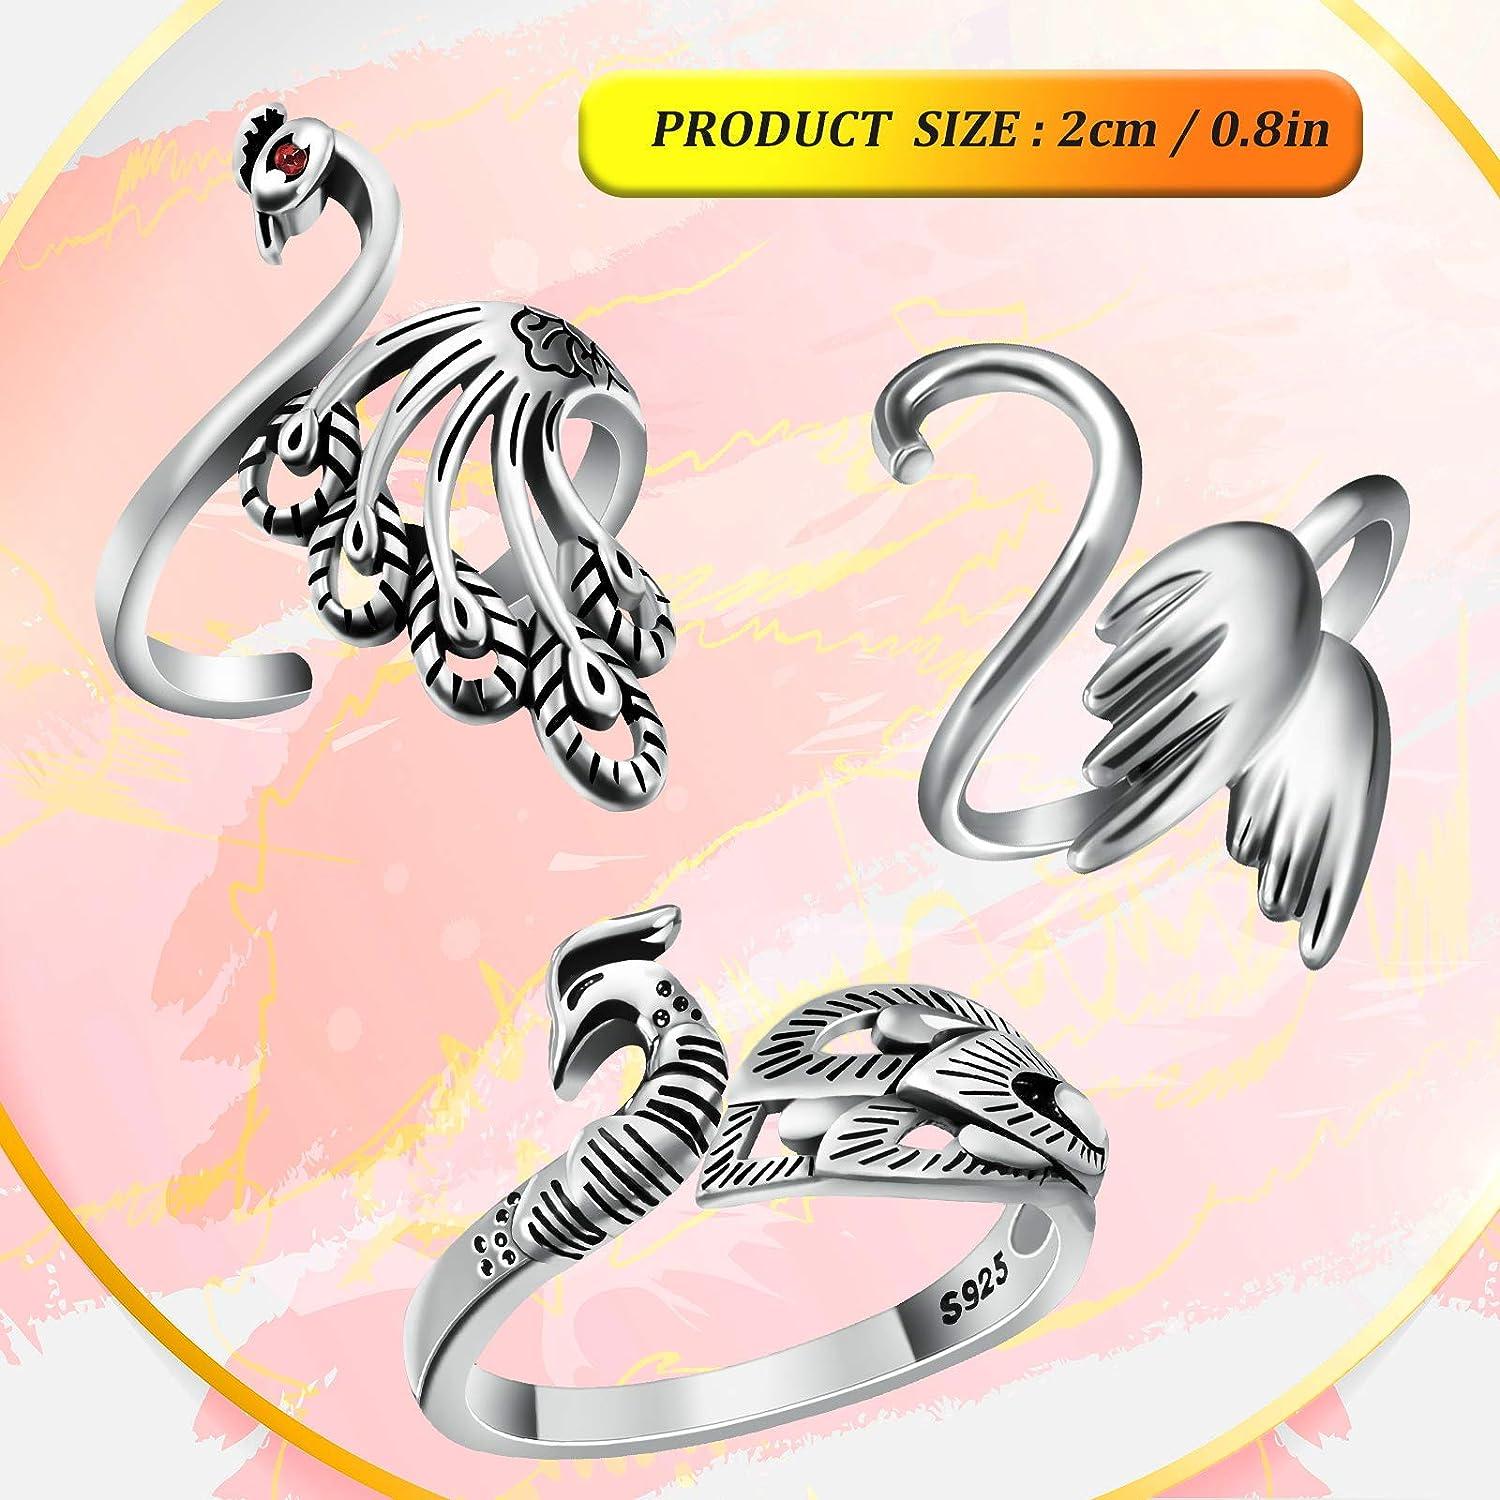 6 Pieces Adjustable Knitting Crochet Loop Ring Knitting Accessories Braided  Knitting Ring Yarn Guide Finger Holder Open Finger Ring for Mother Grandma  Thanksgiving Presents 3 Styles (Silver)